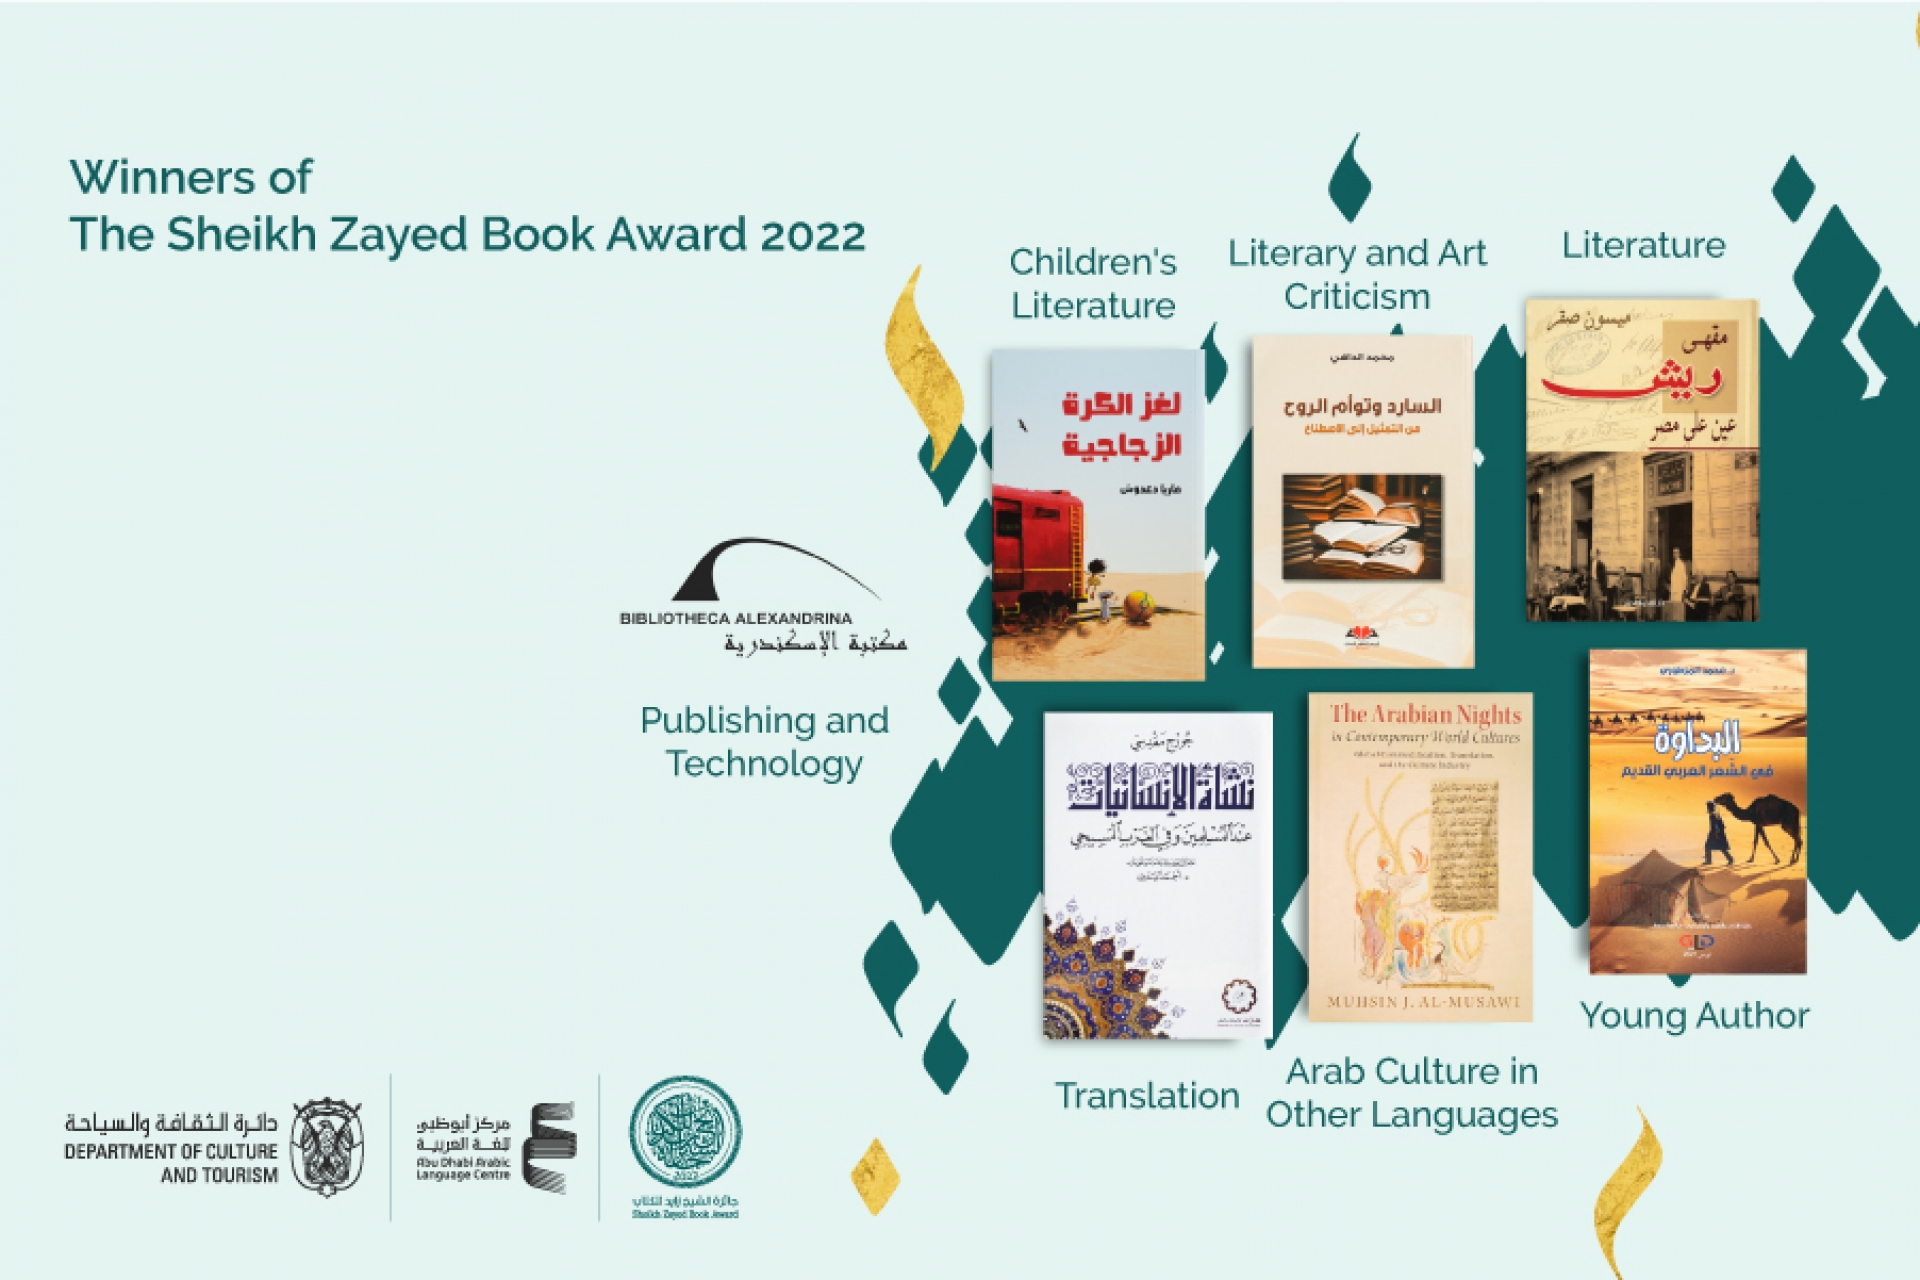 Sheikh Zayed Book Award: The World’s leading Arabic literature  and culture prize announces 2022 winners